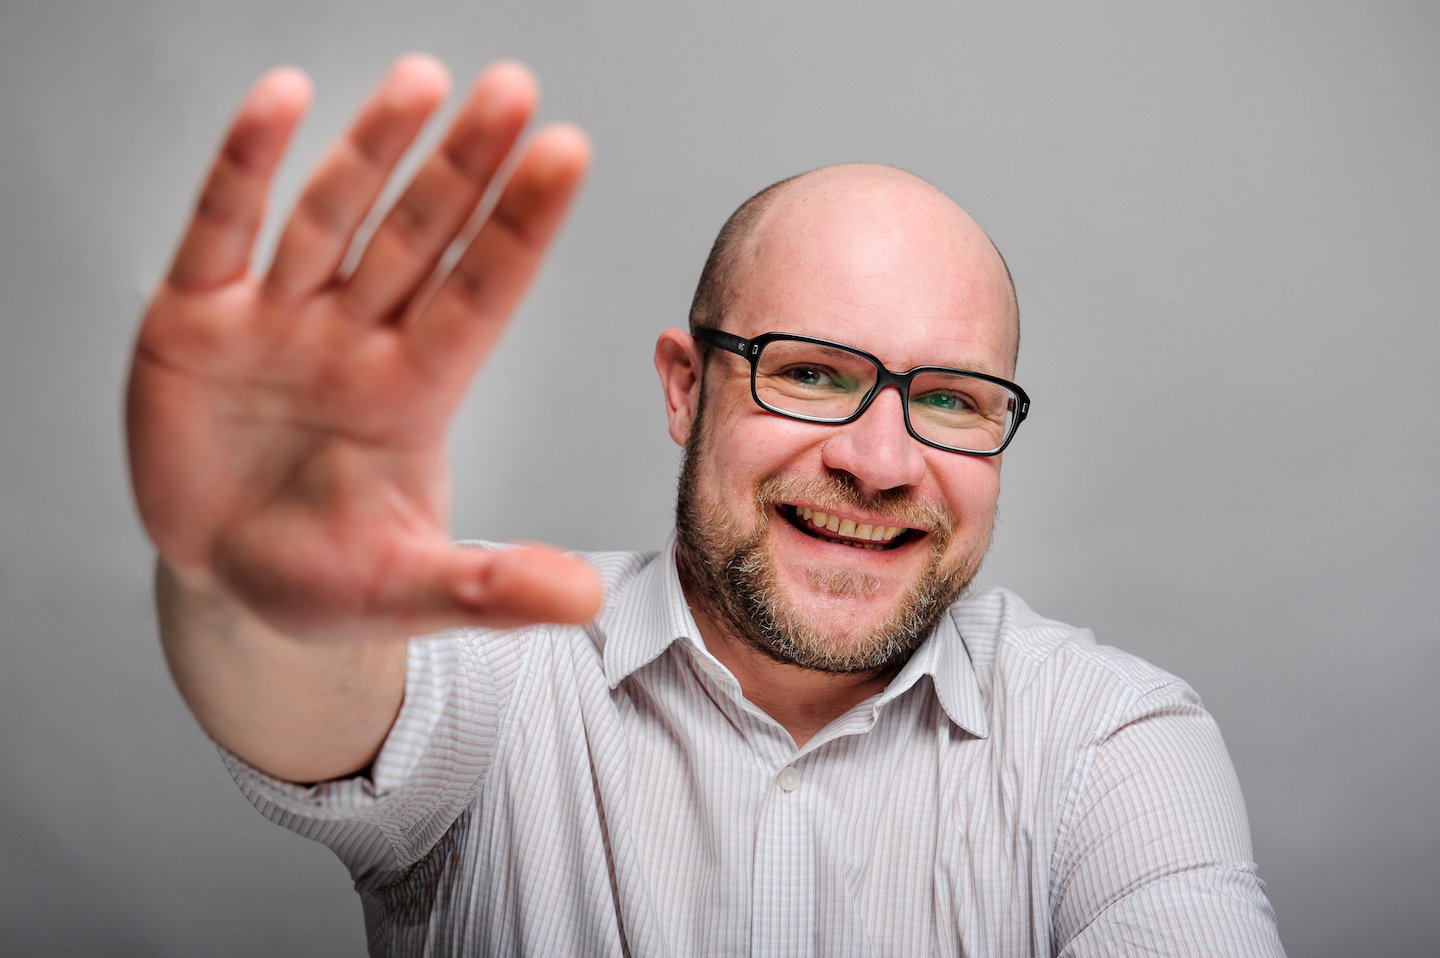 man holding five fingers up